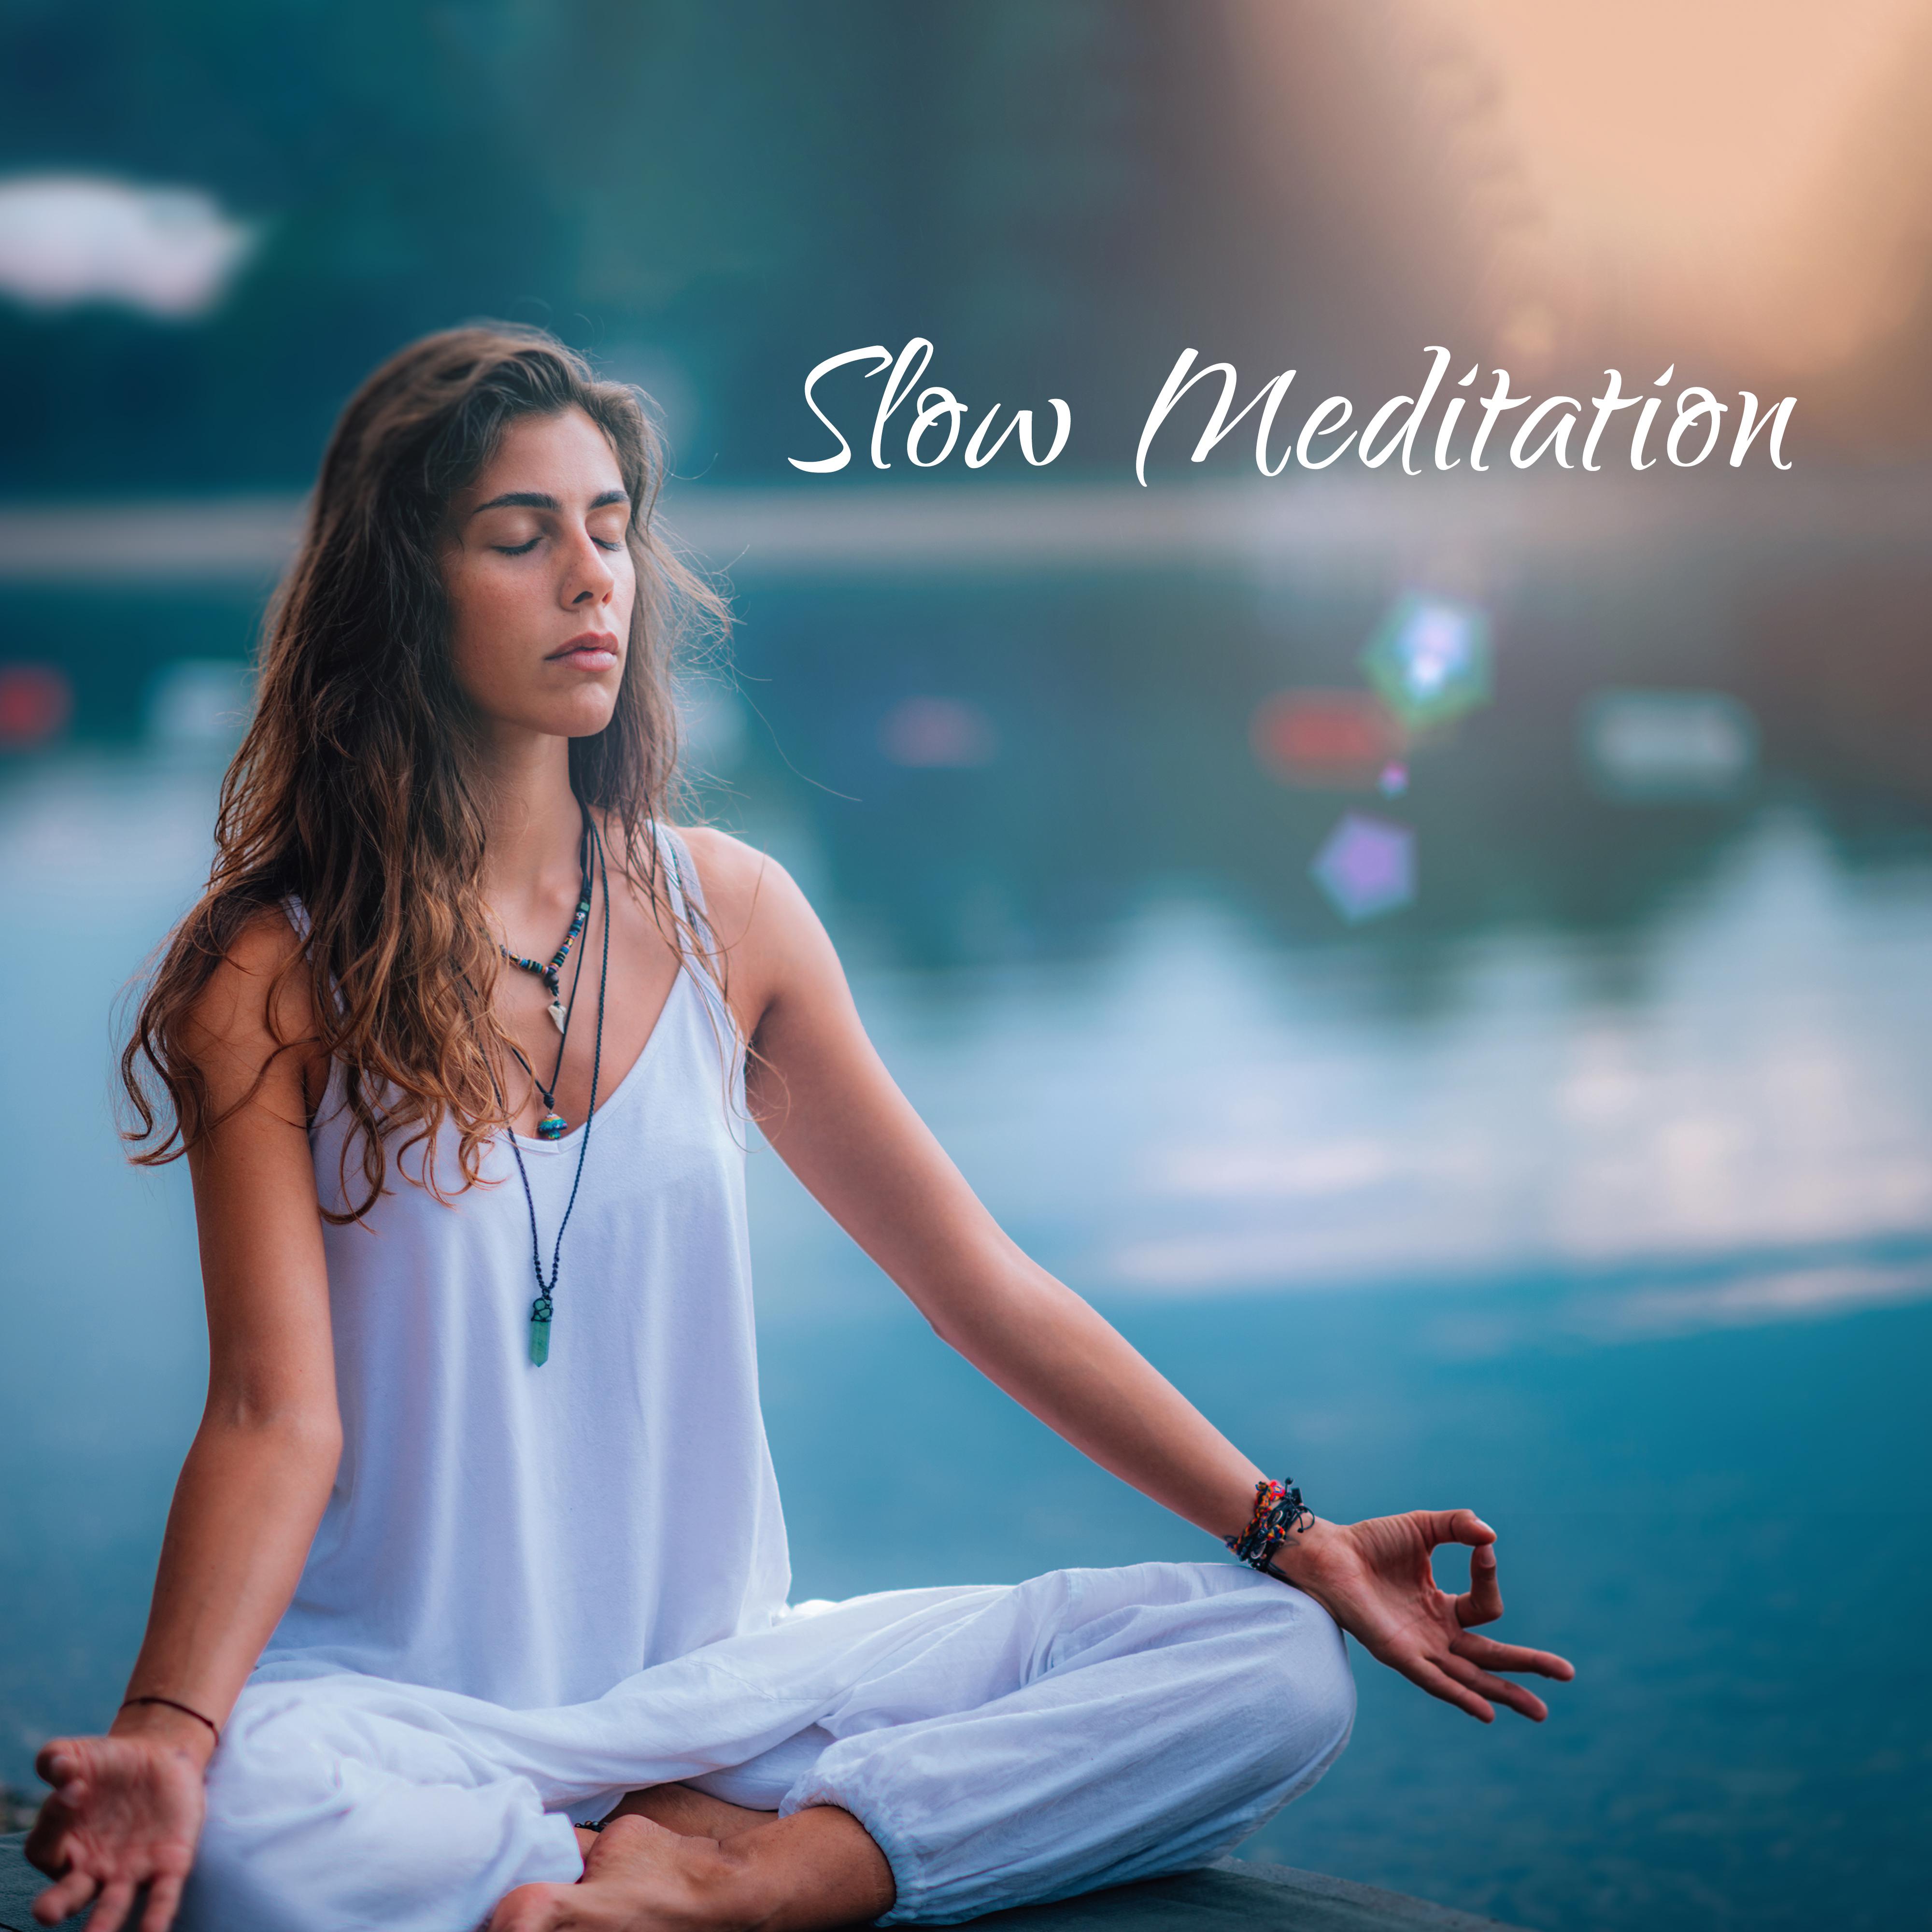 Slow Meditation – Therapeutic Songs for Relaxation, Yoga, Deep Meditation, Stress Relief, Calm Down, Reiki Healing